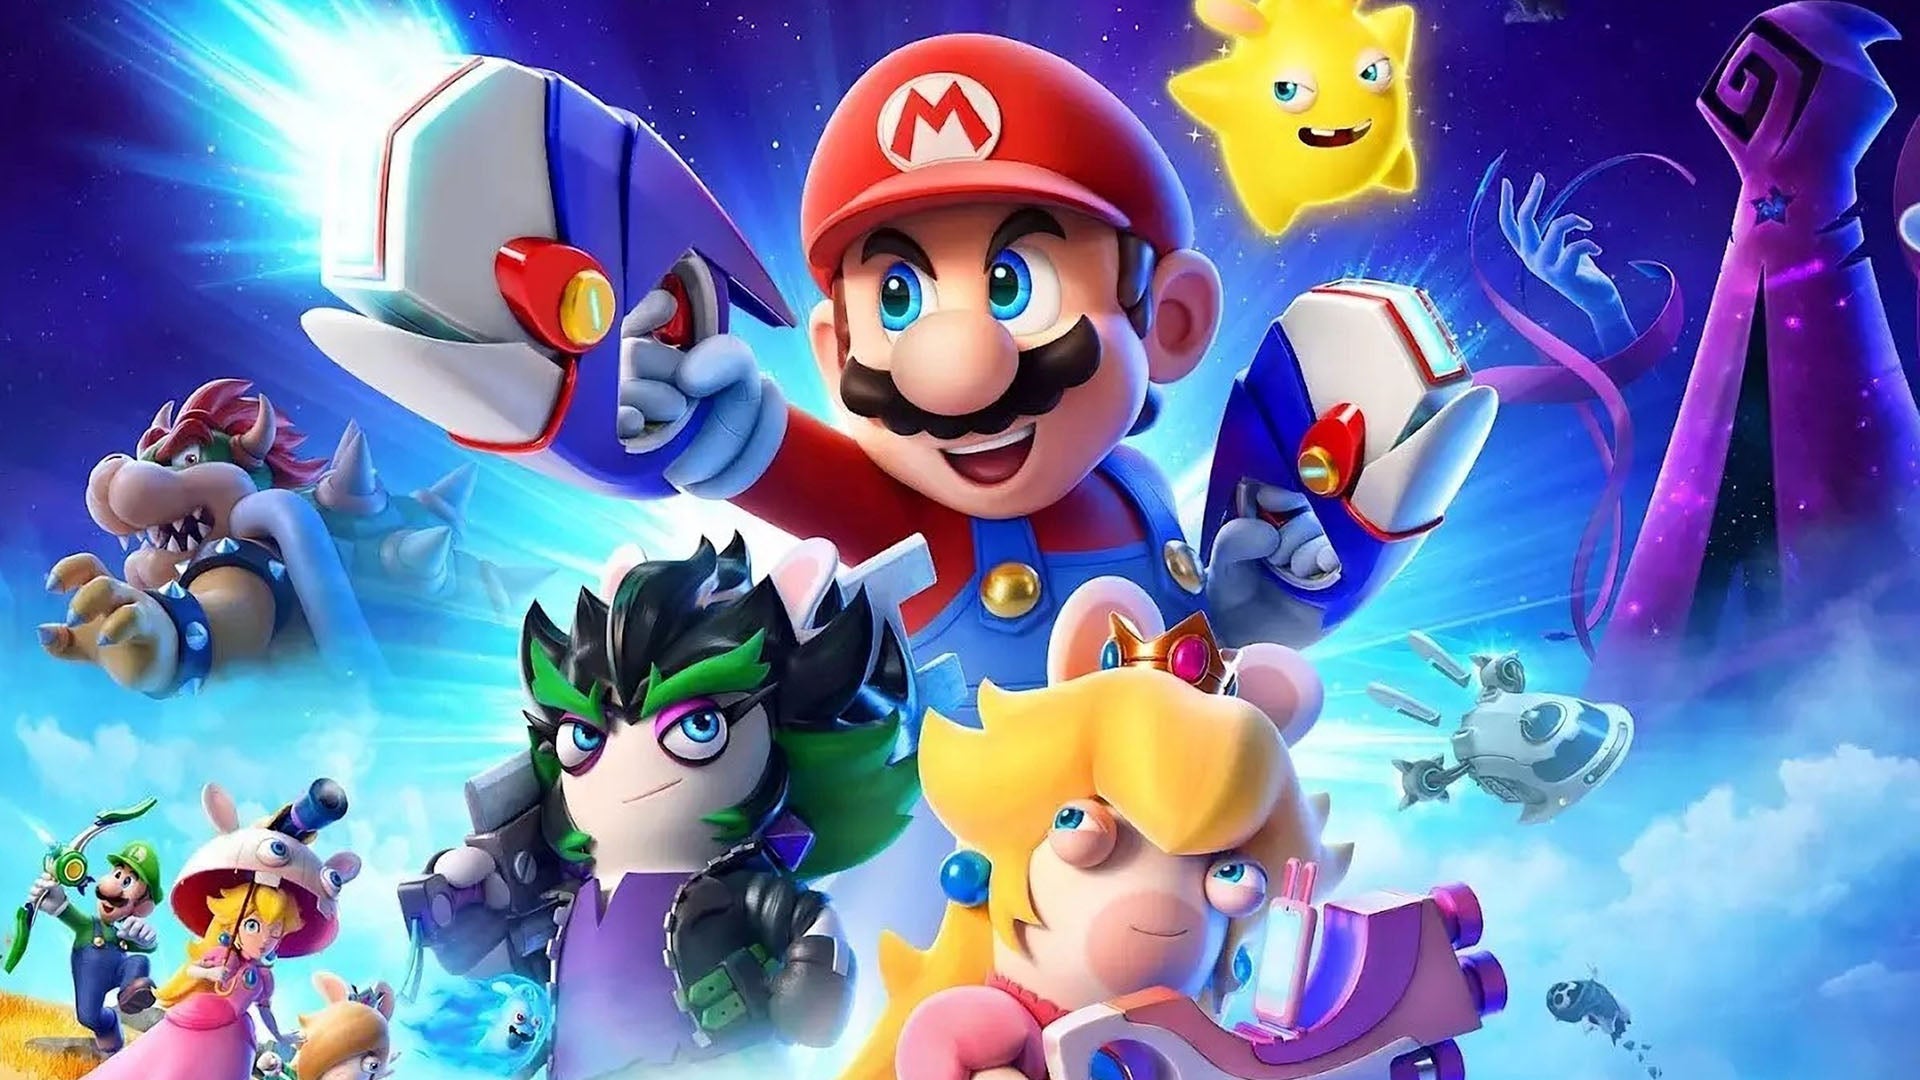 Mario + Rabbids Sparks of Hope a much improved game